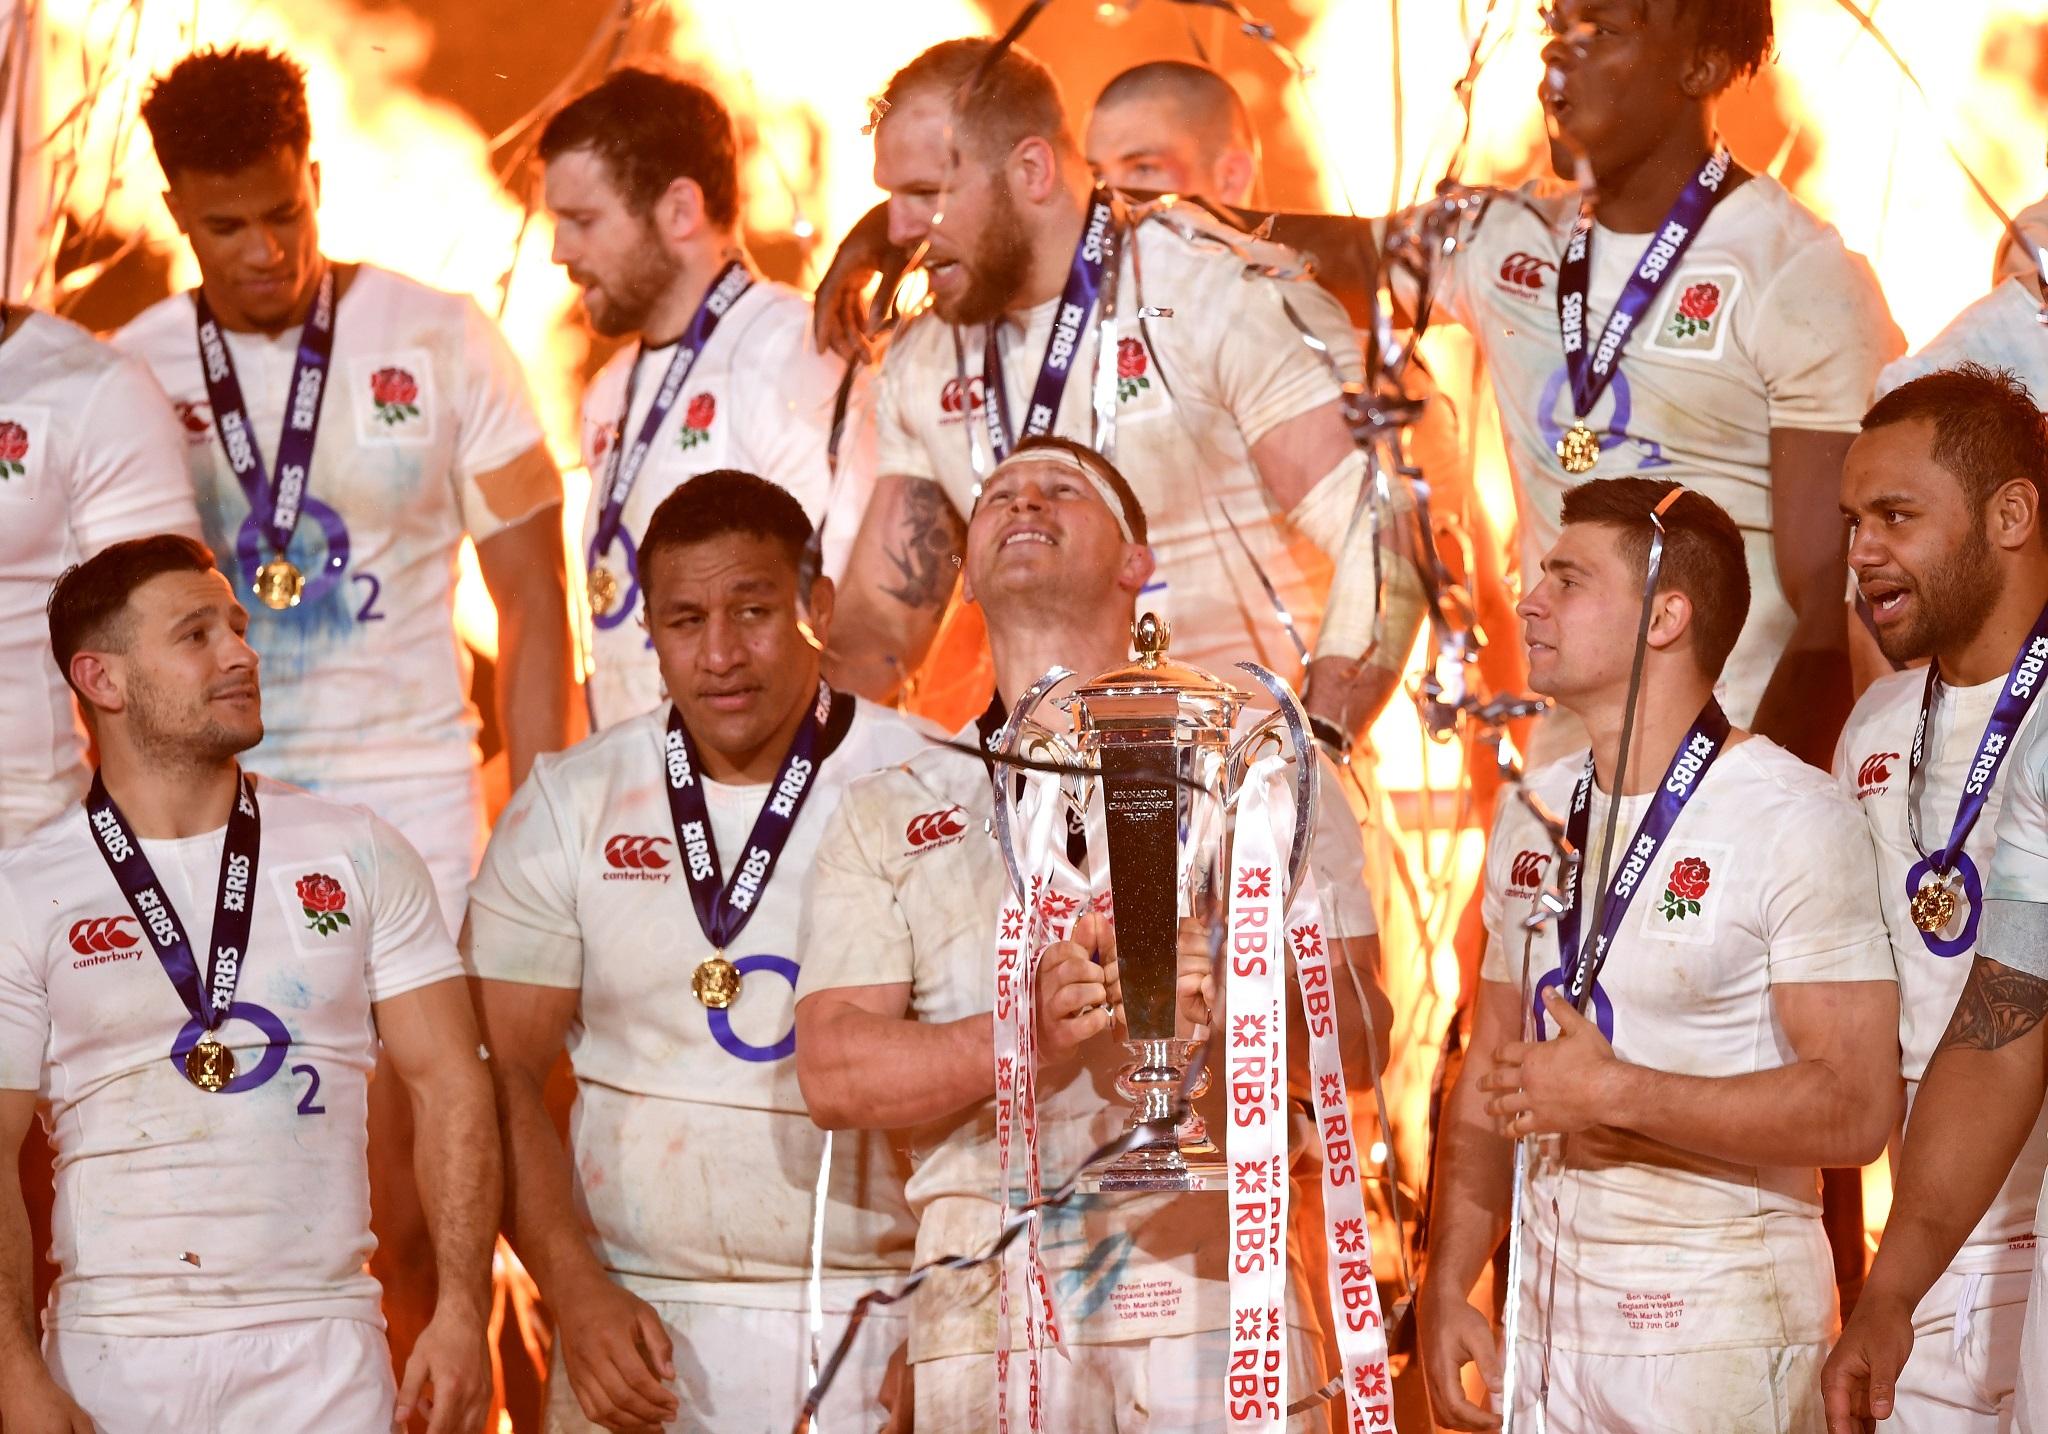 England won the Six Nations but missed out on the Grand Slam